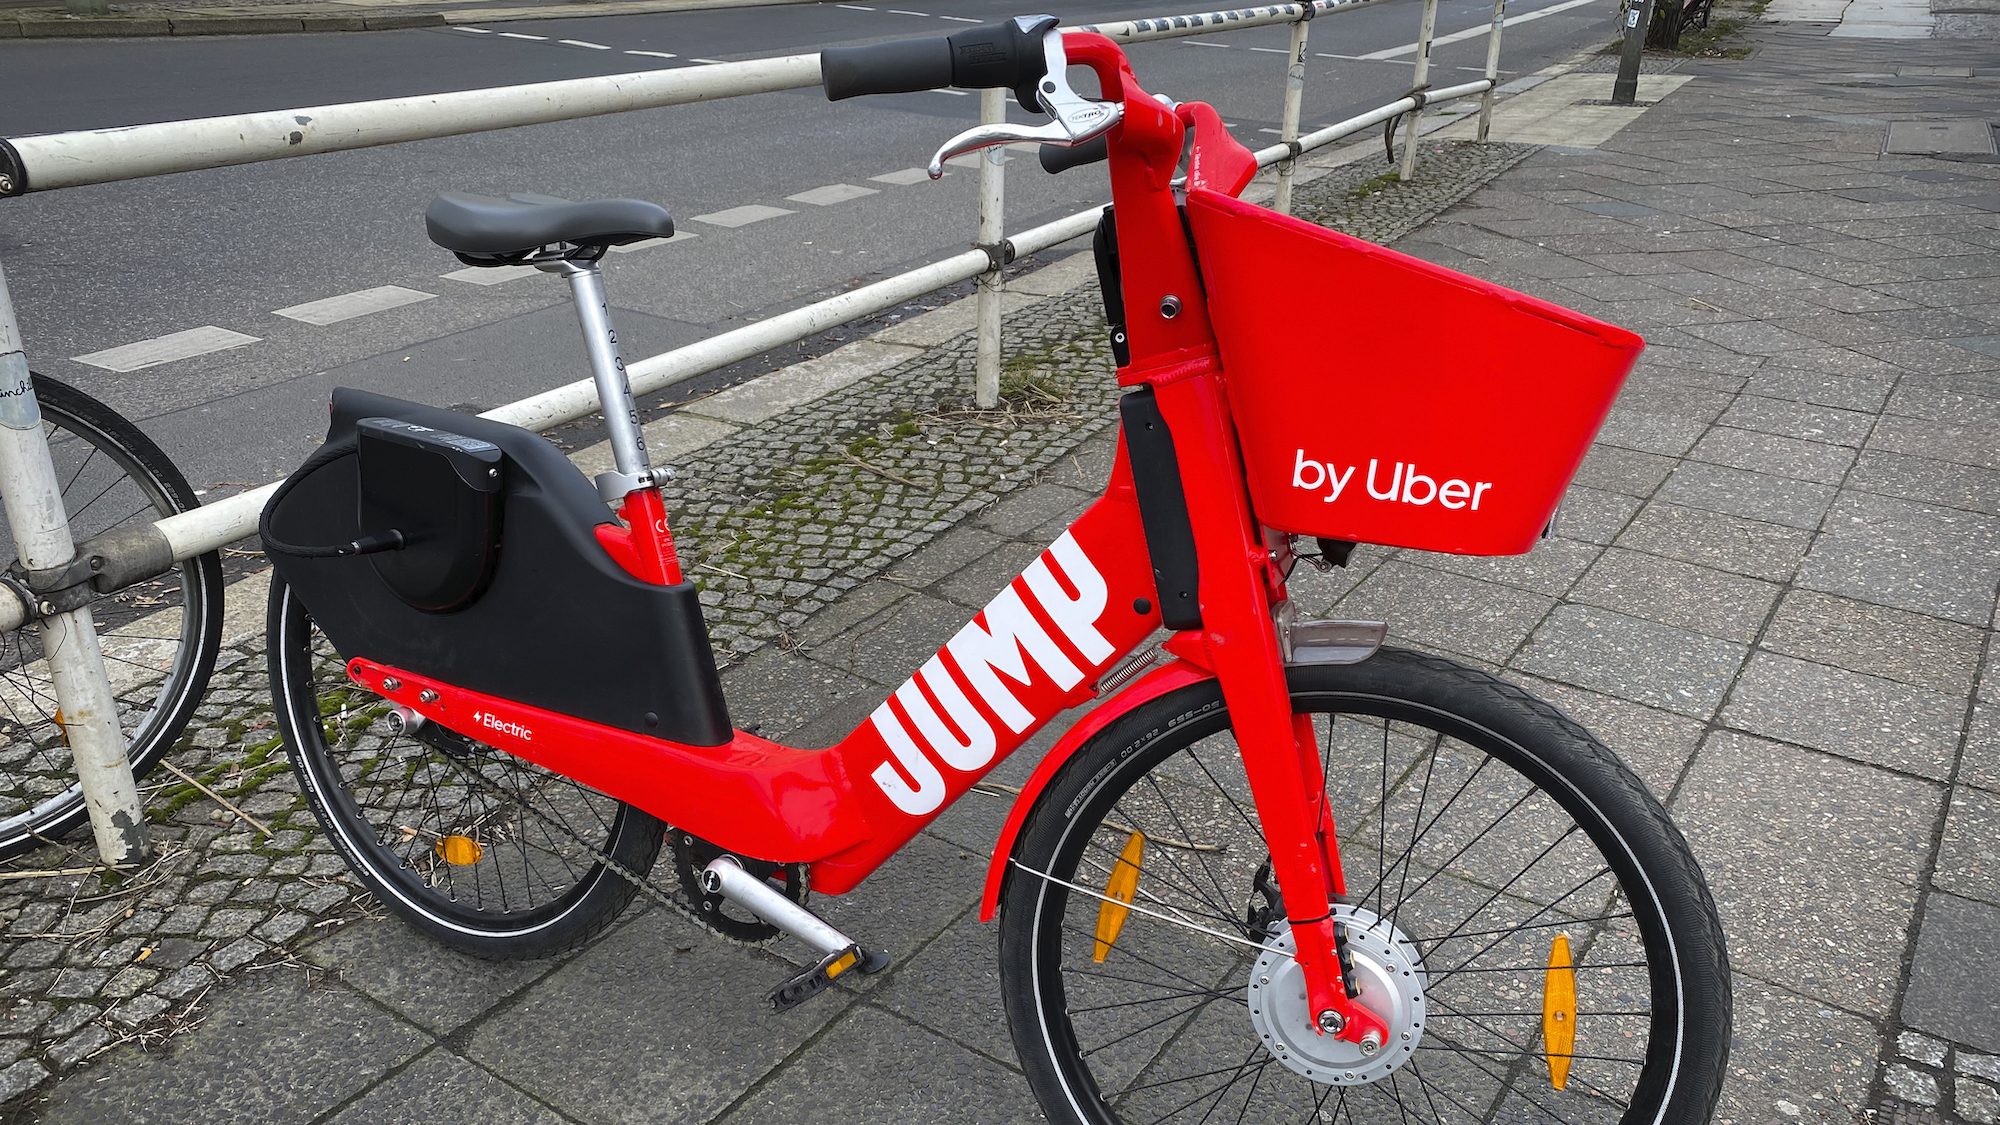 uber bike and scooter